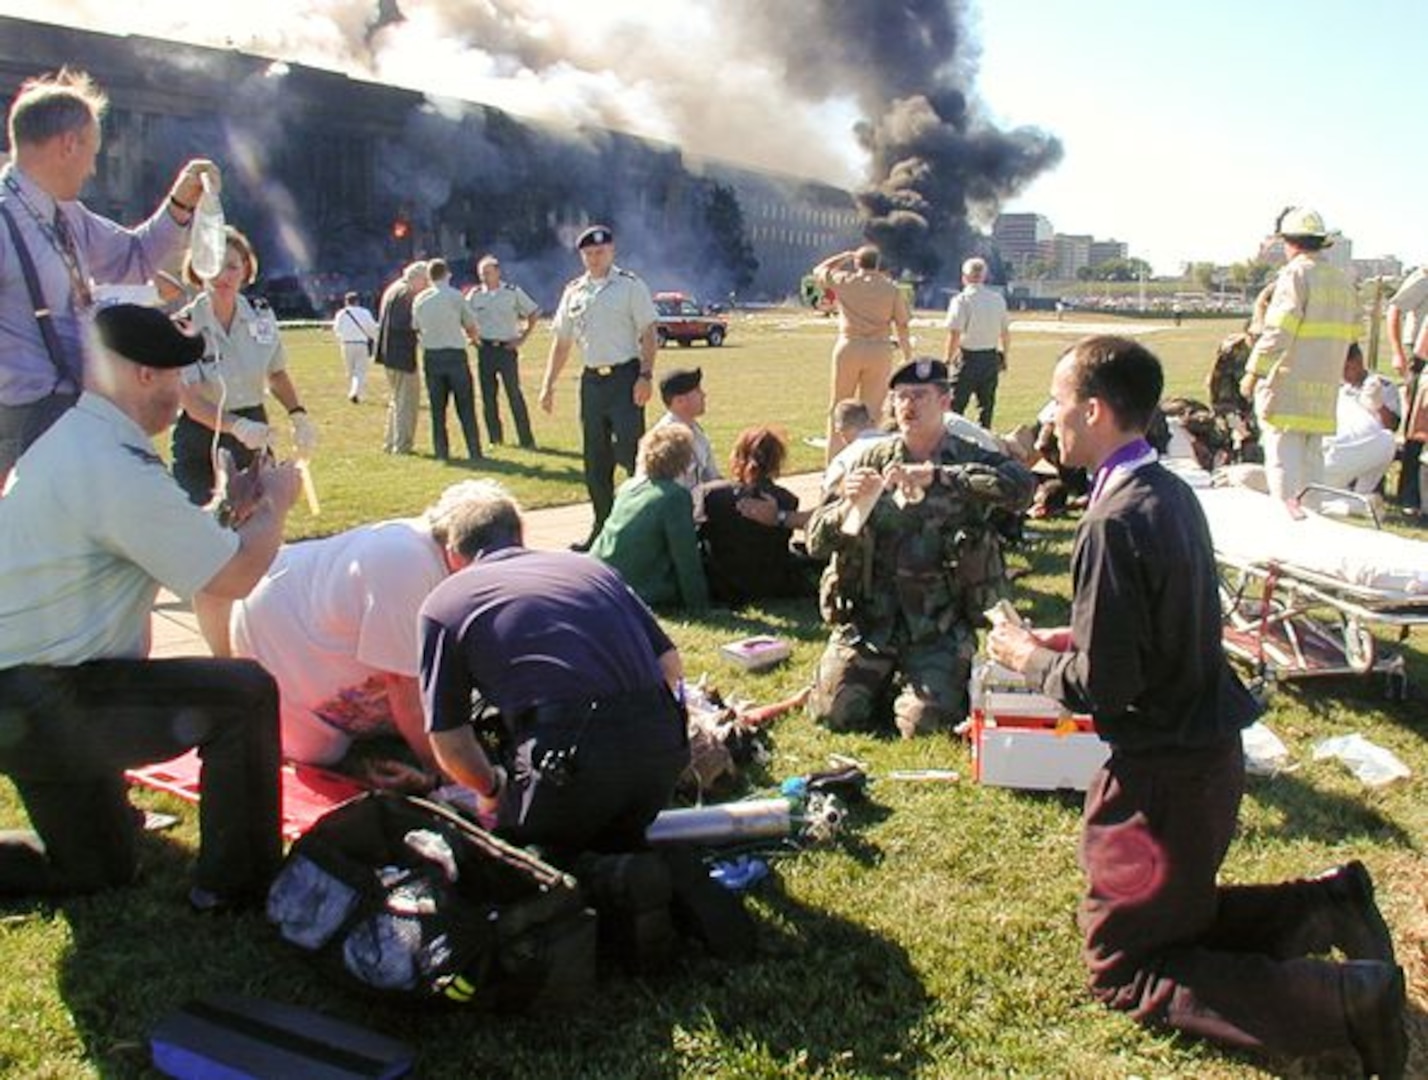 Men and women are scattered on the grass outside of a smoking building.